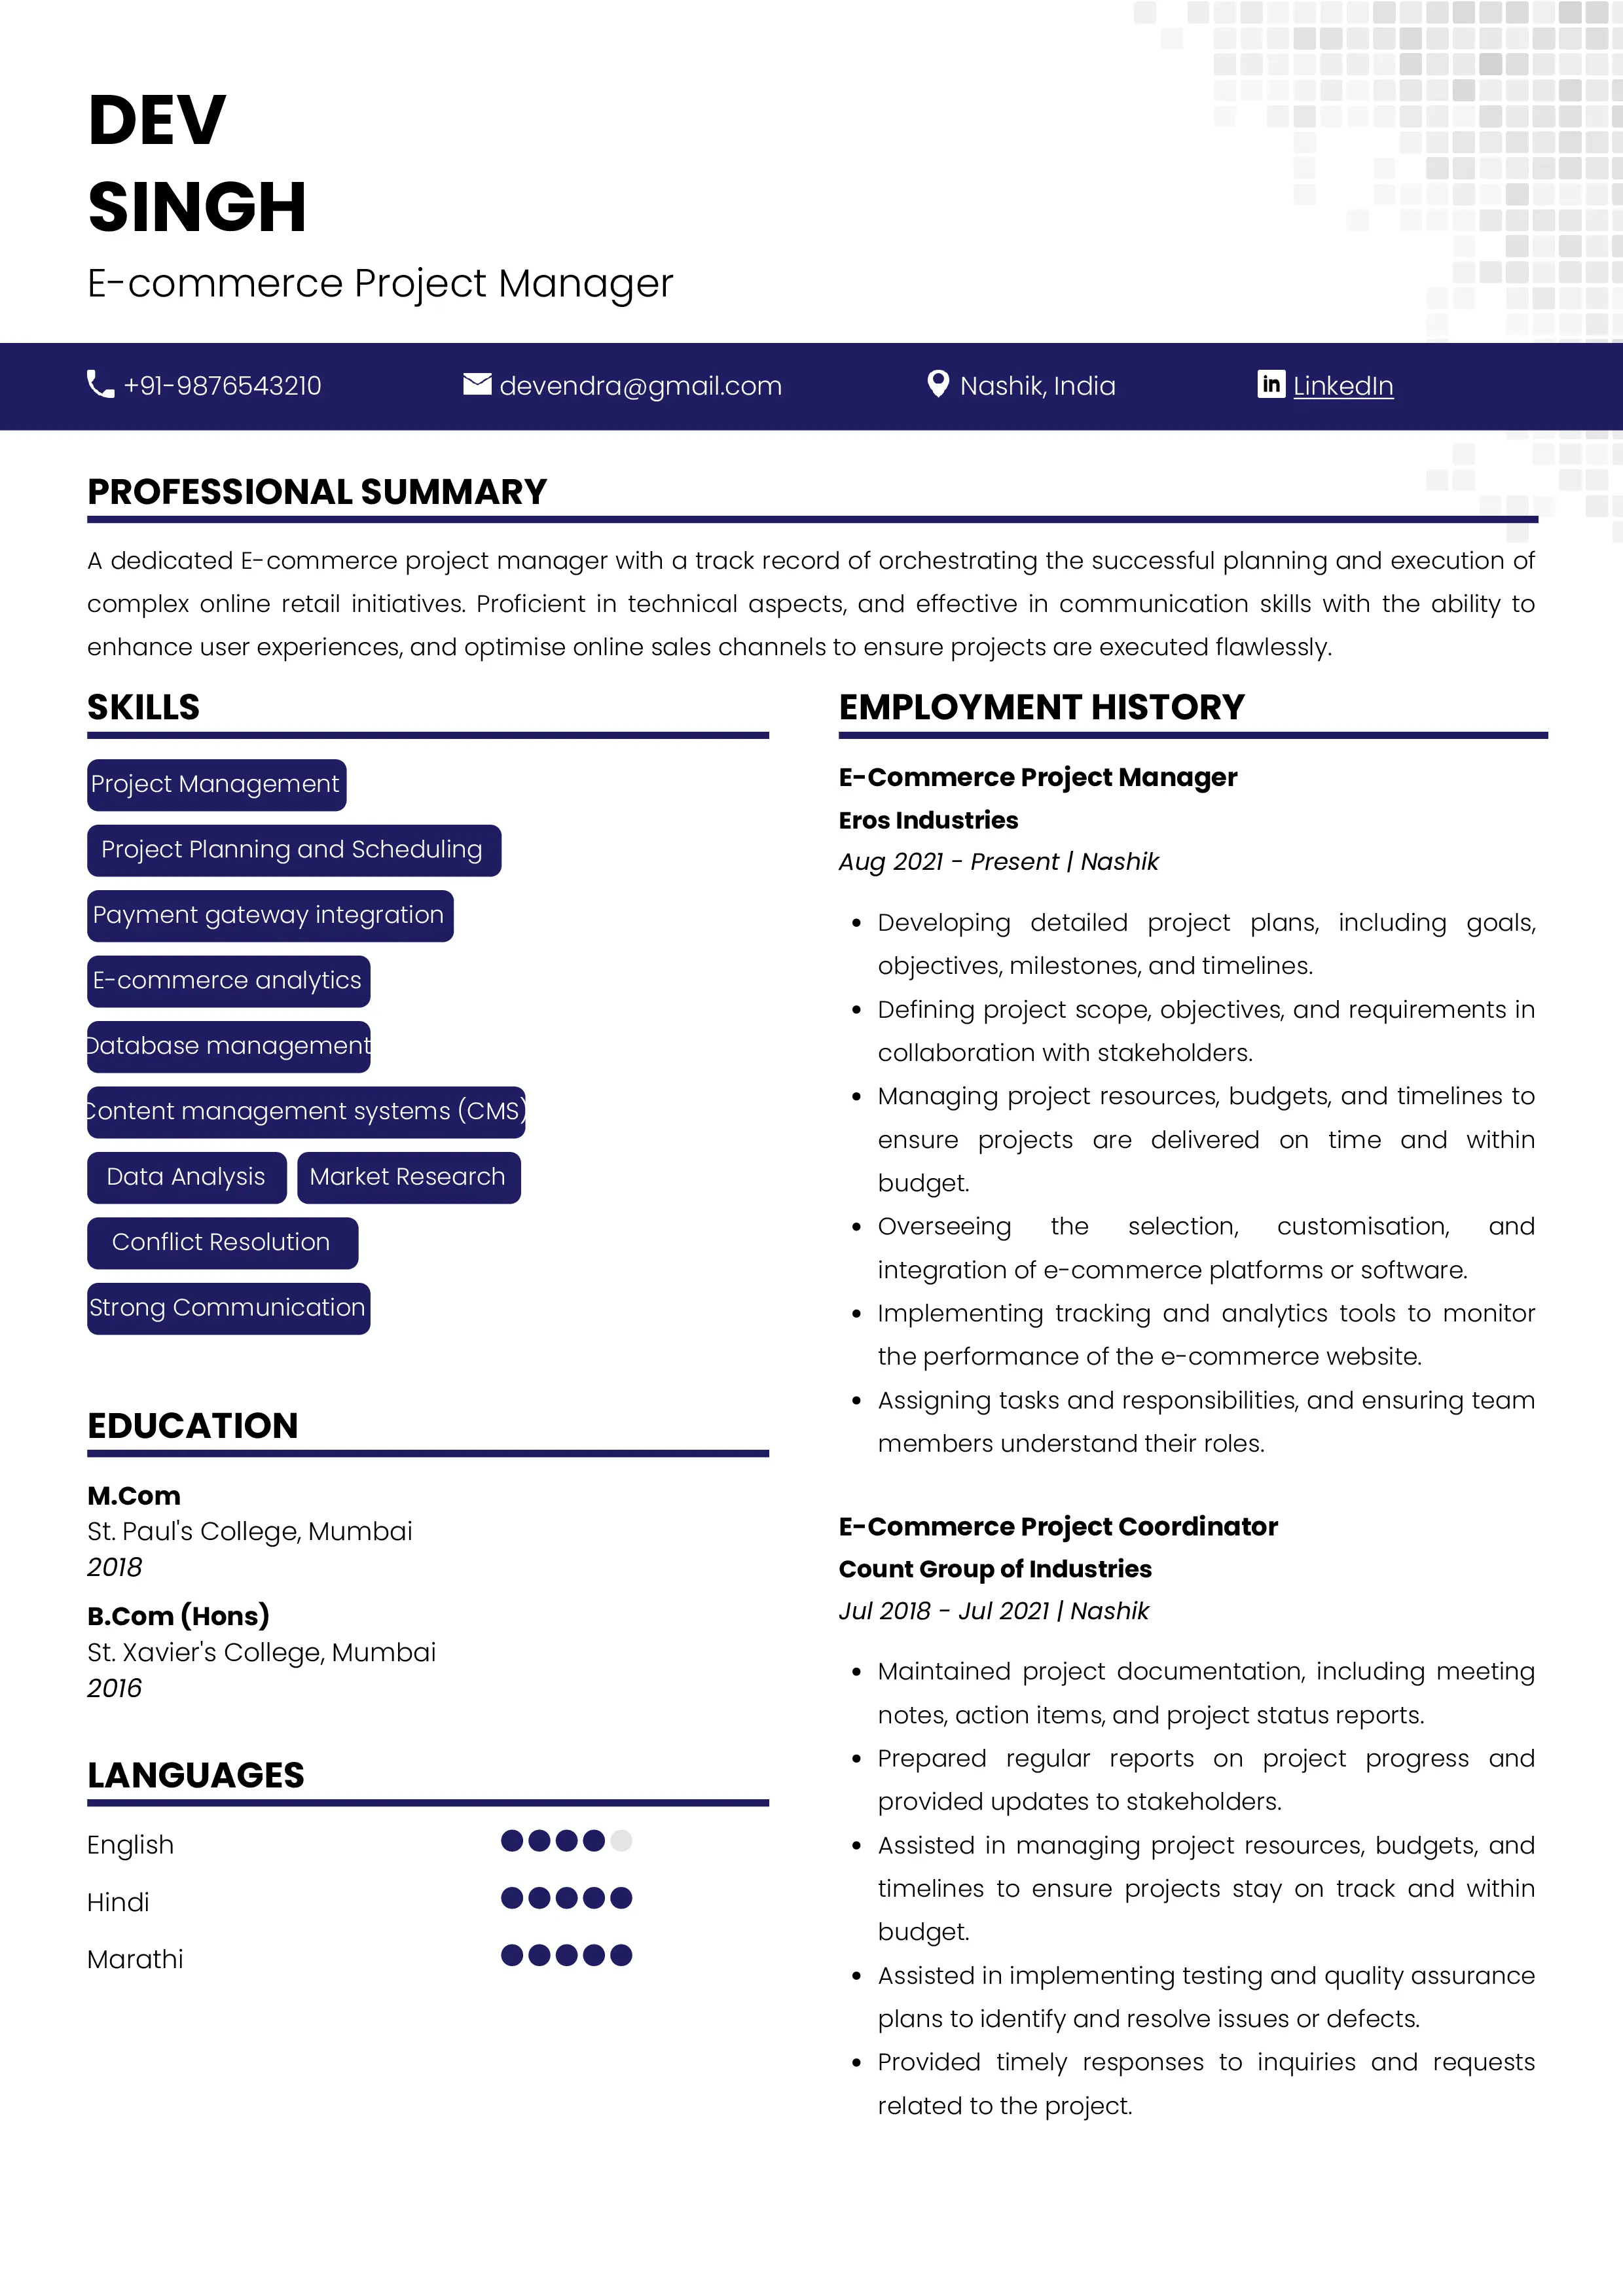 Sample Resume of  E-Commerce Project Manager | Free Resume Templates & Samples on Resumod.co